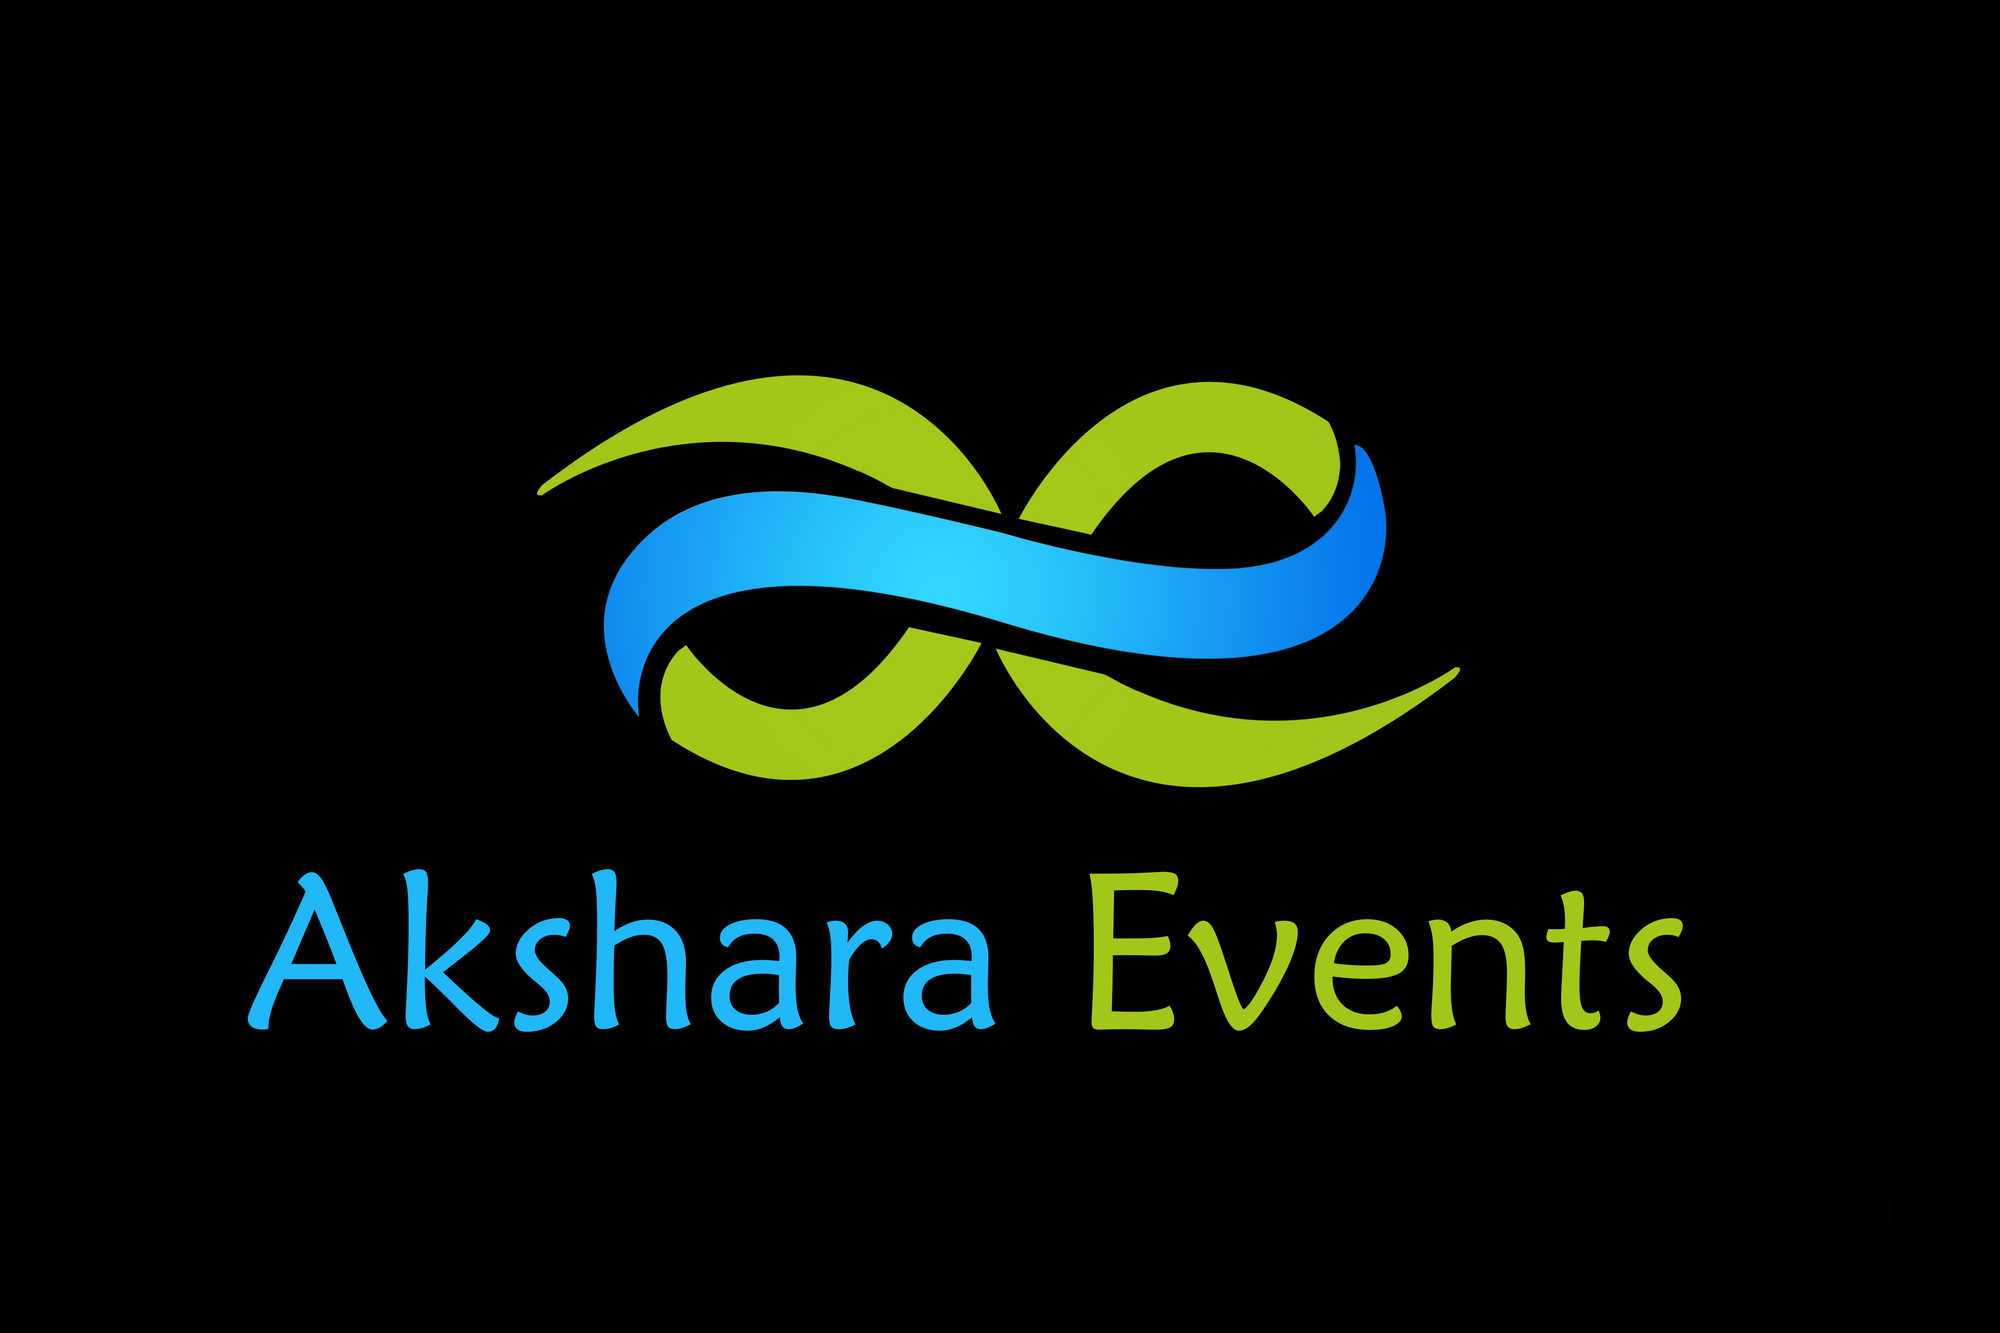 Event management companies in Hyderabad[Akshara events]